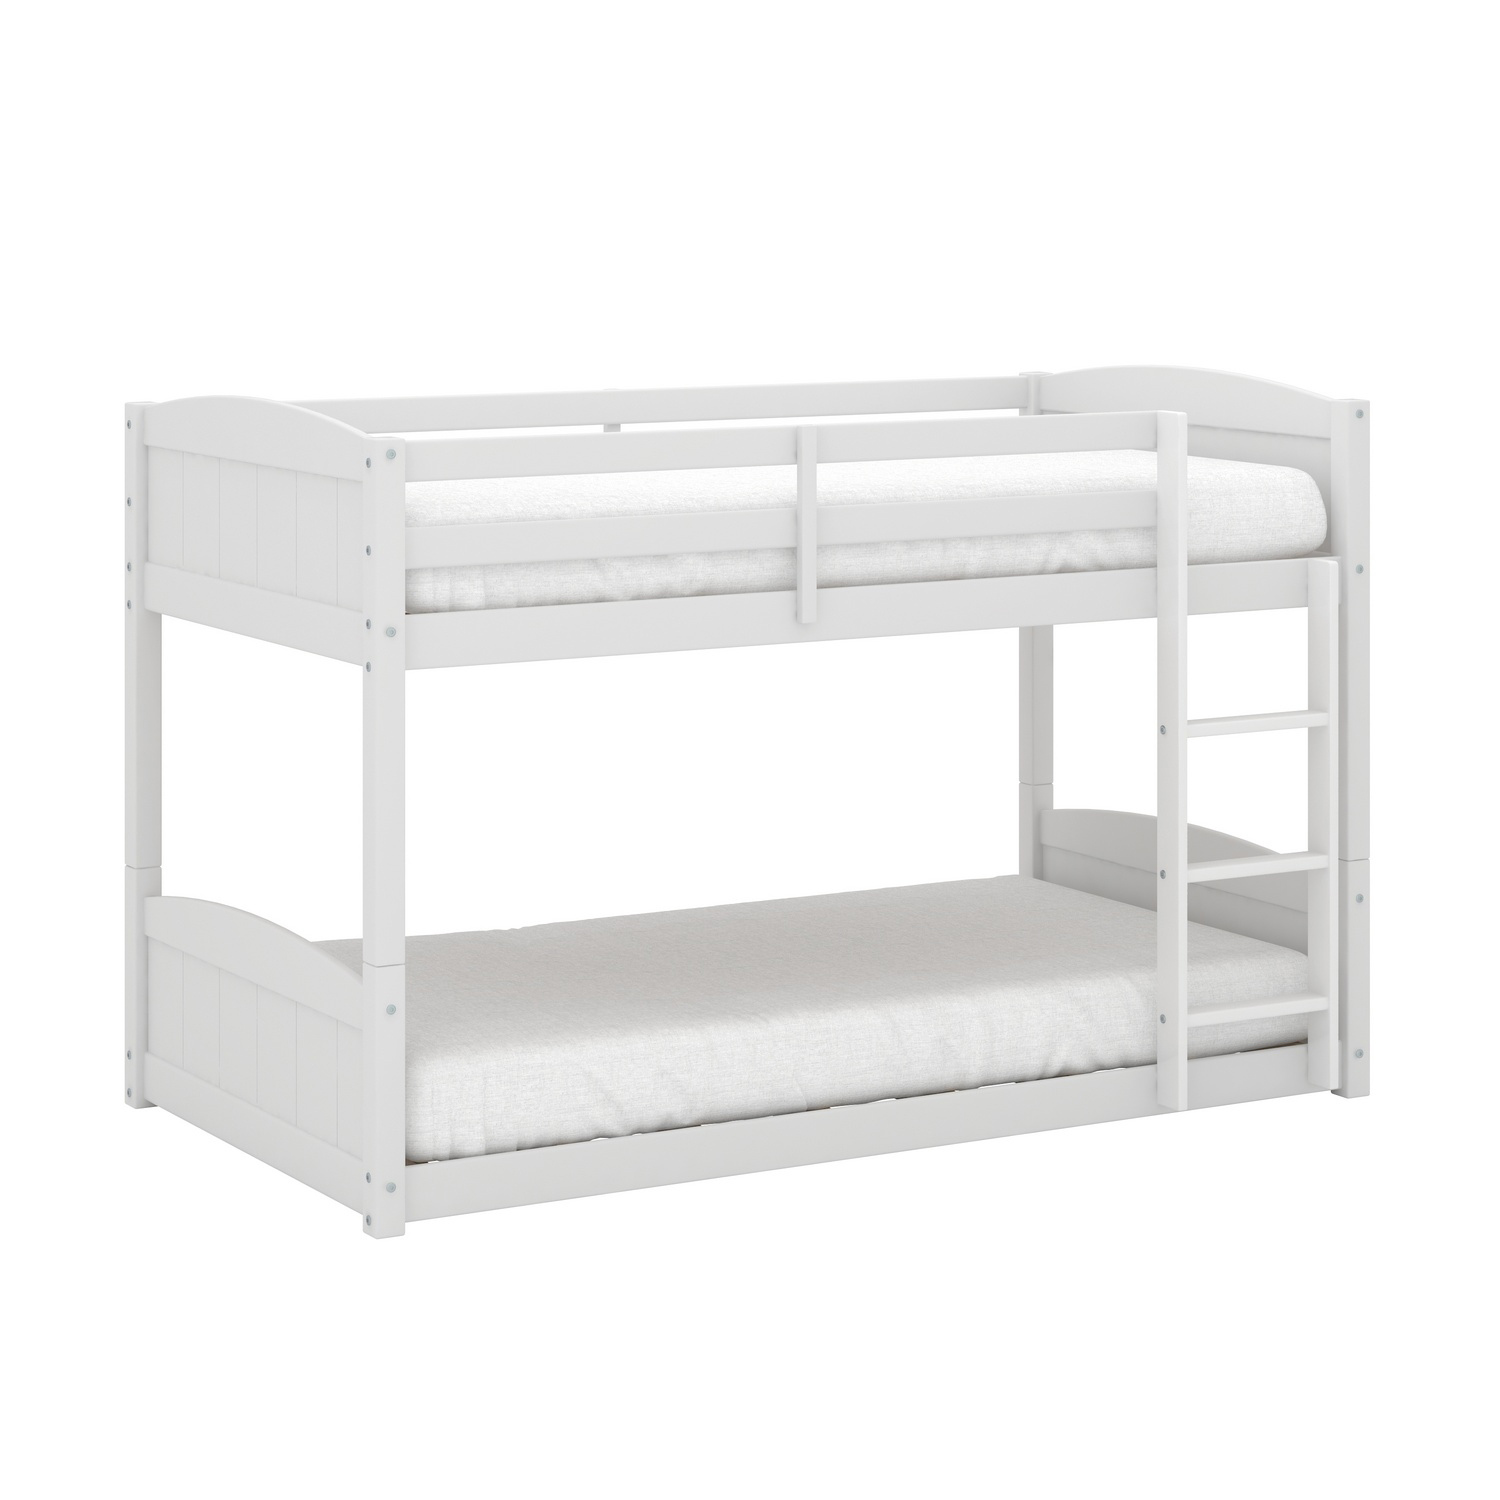 Hillsdale Alexis Wood Arch Twin Over Twin Floor Bunk Bed - White